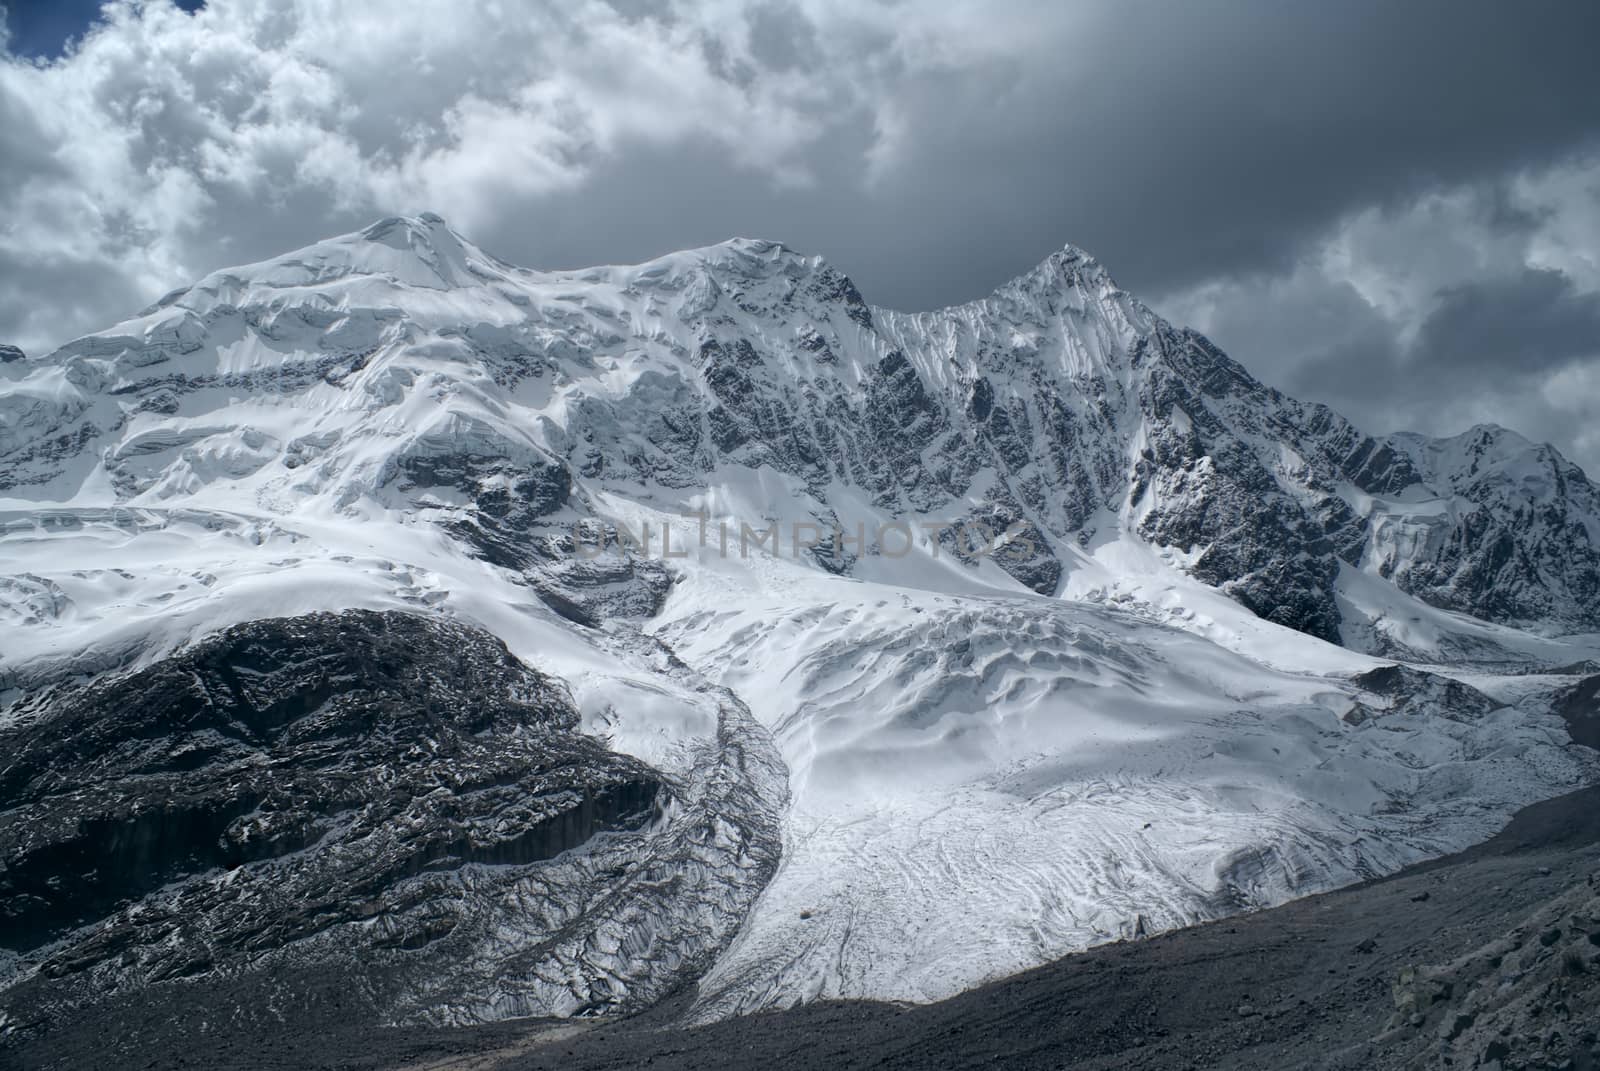 Scenic mountains and glacier in south american Andes in Peru, Ausangate